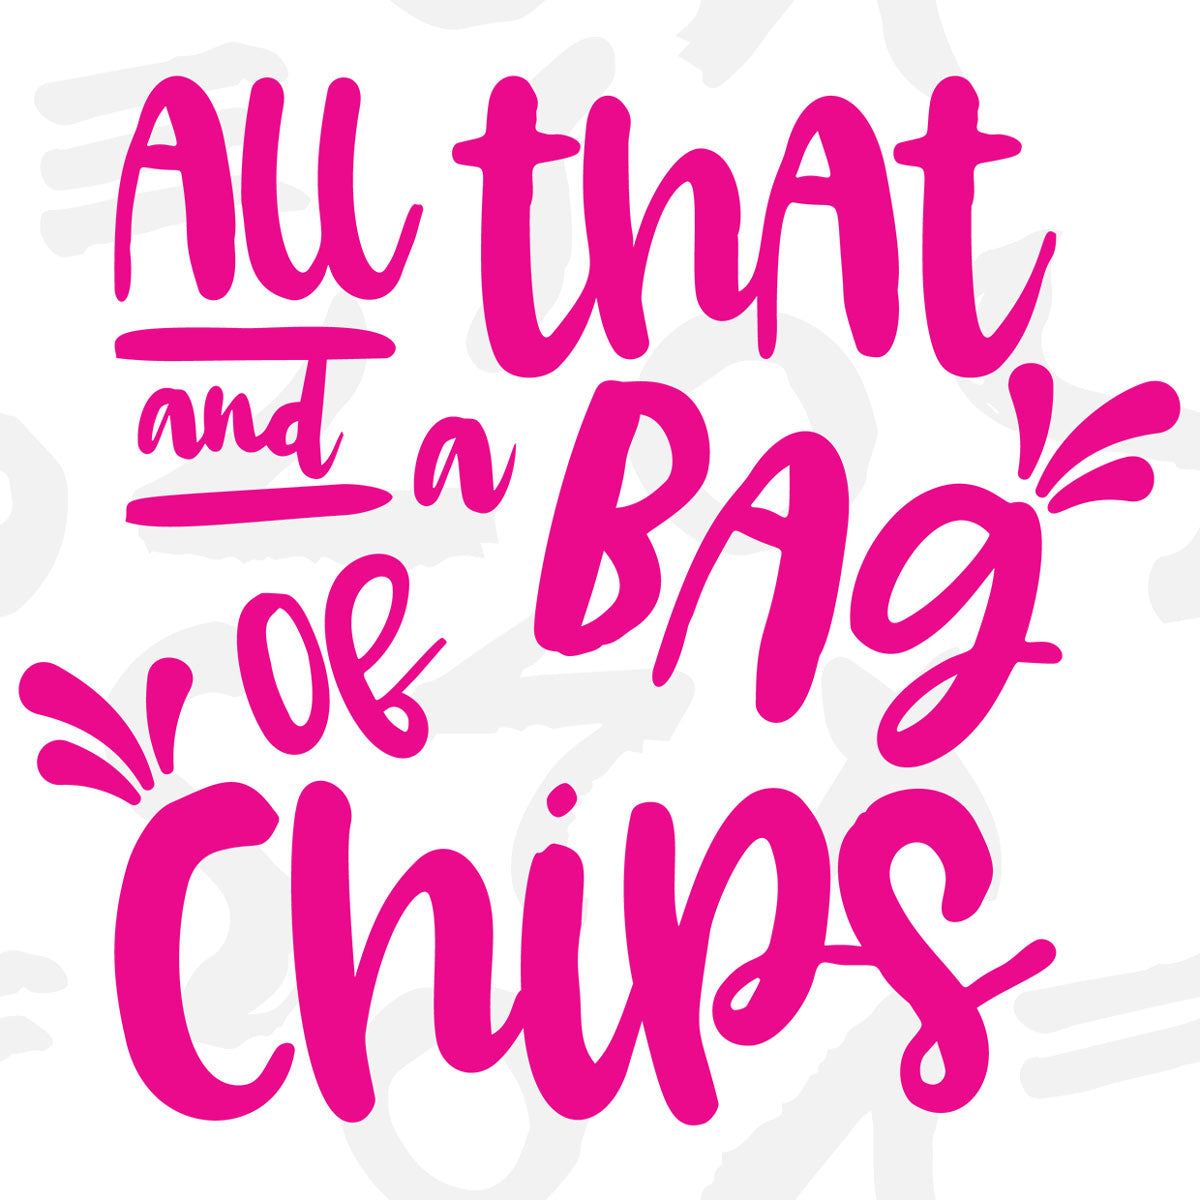 Freebie Friday - All That and a Bag of Chips svg cut file - Free for Personal Use